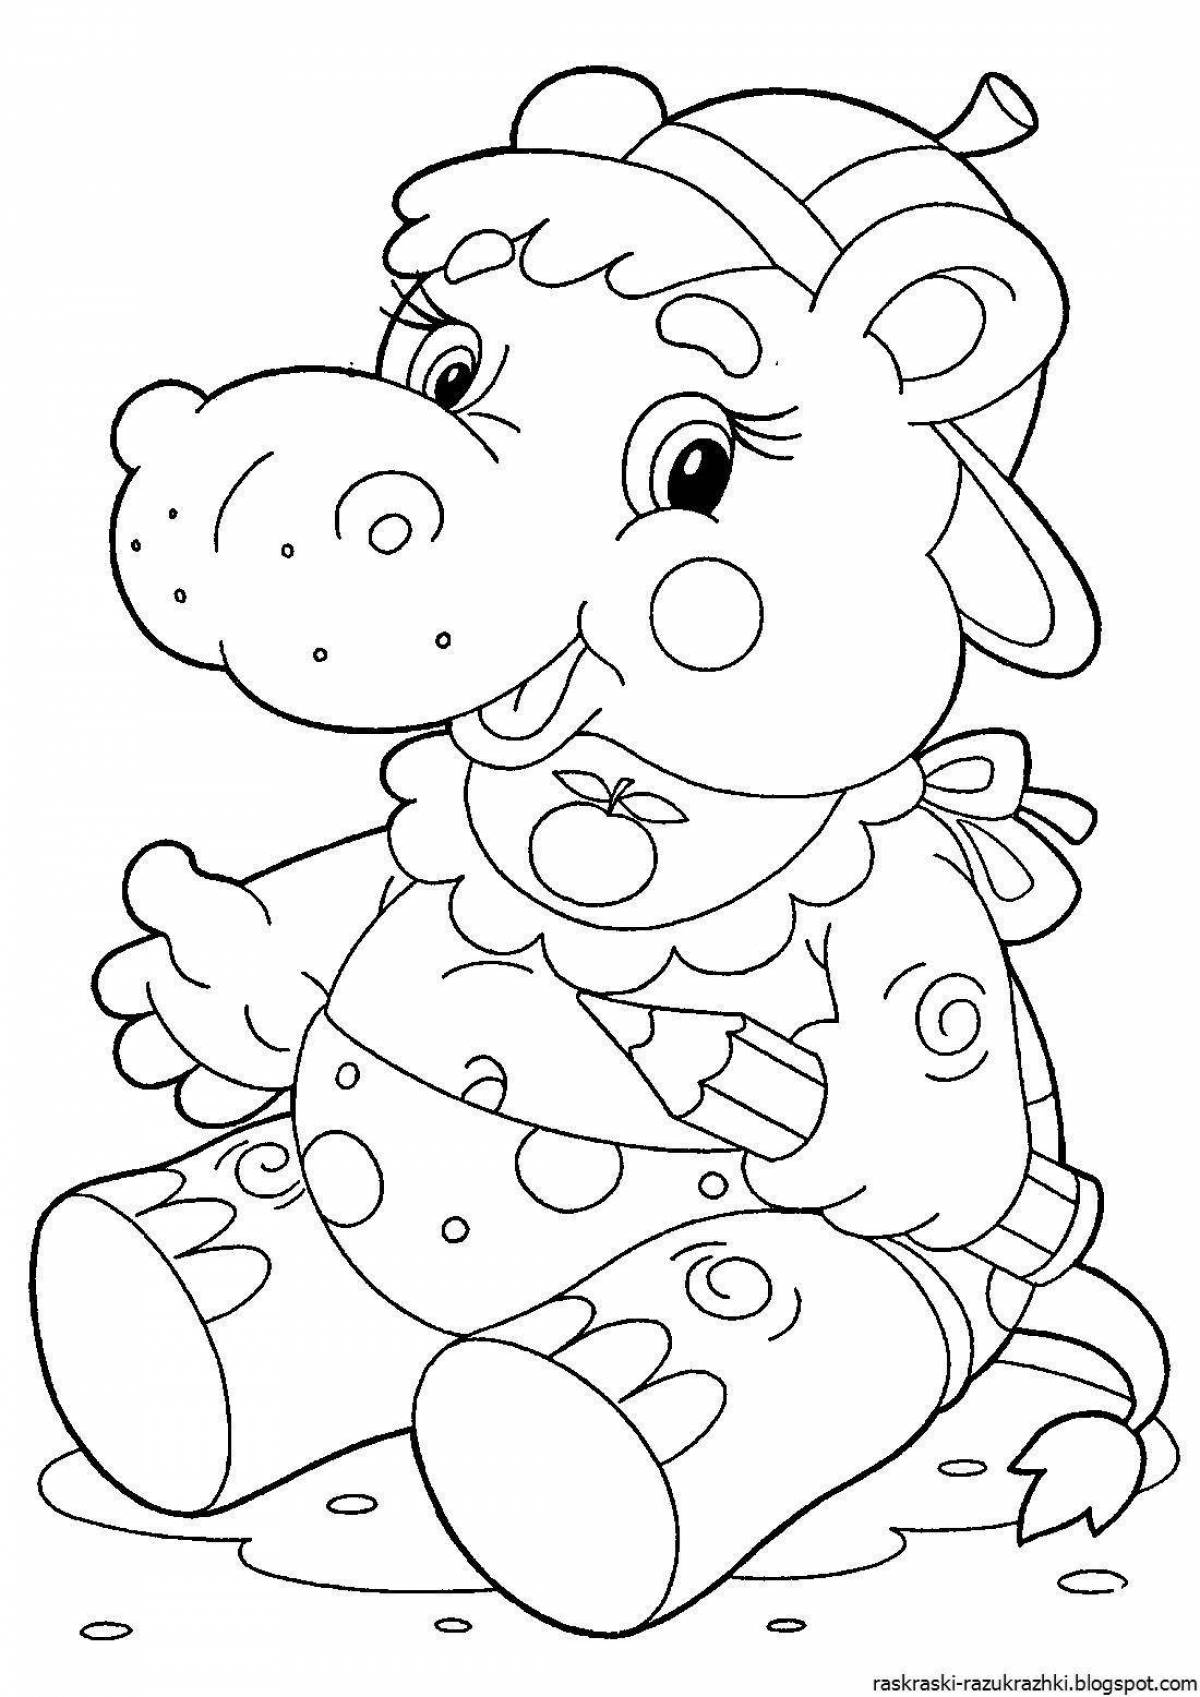 Colorful hippo coloring page